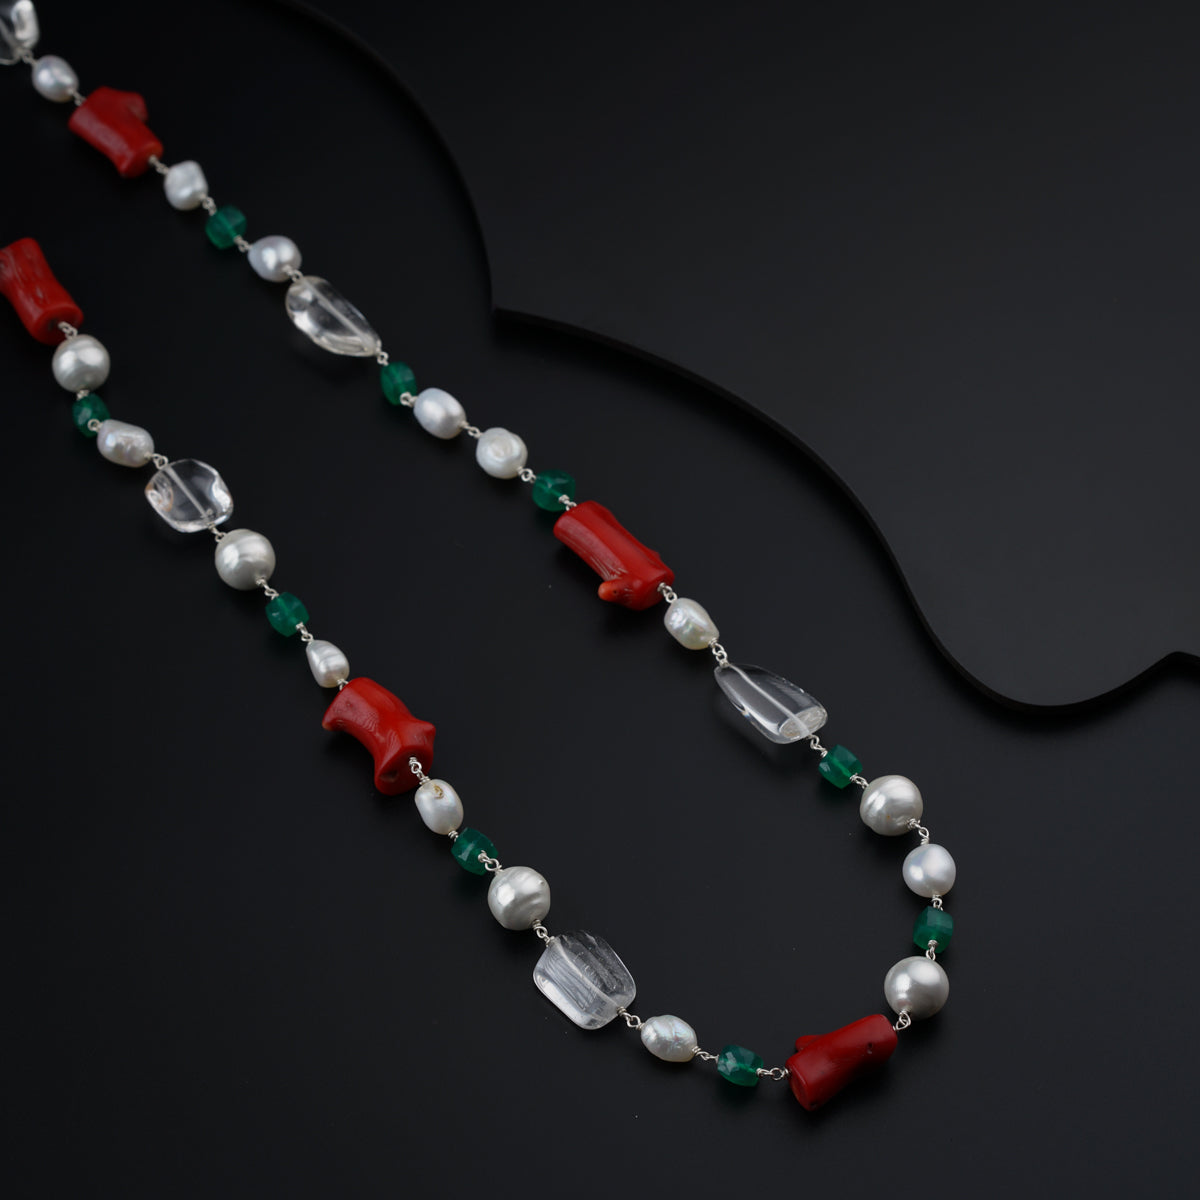 a long necklace with a red and green bead